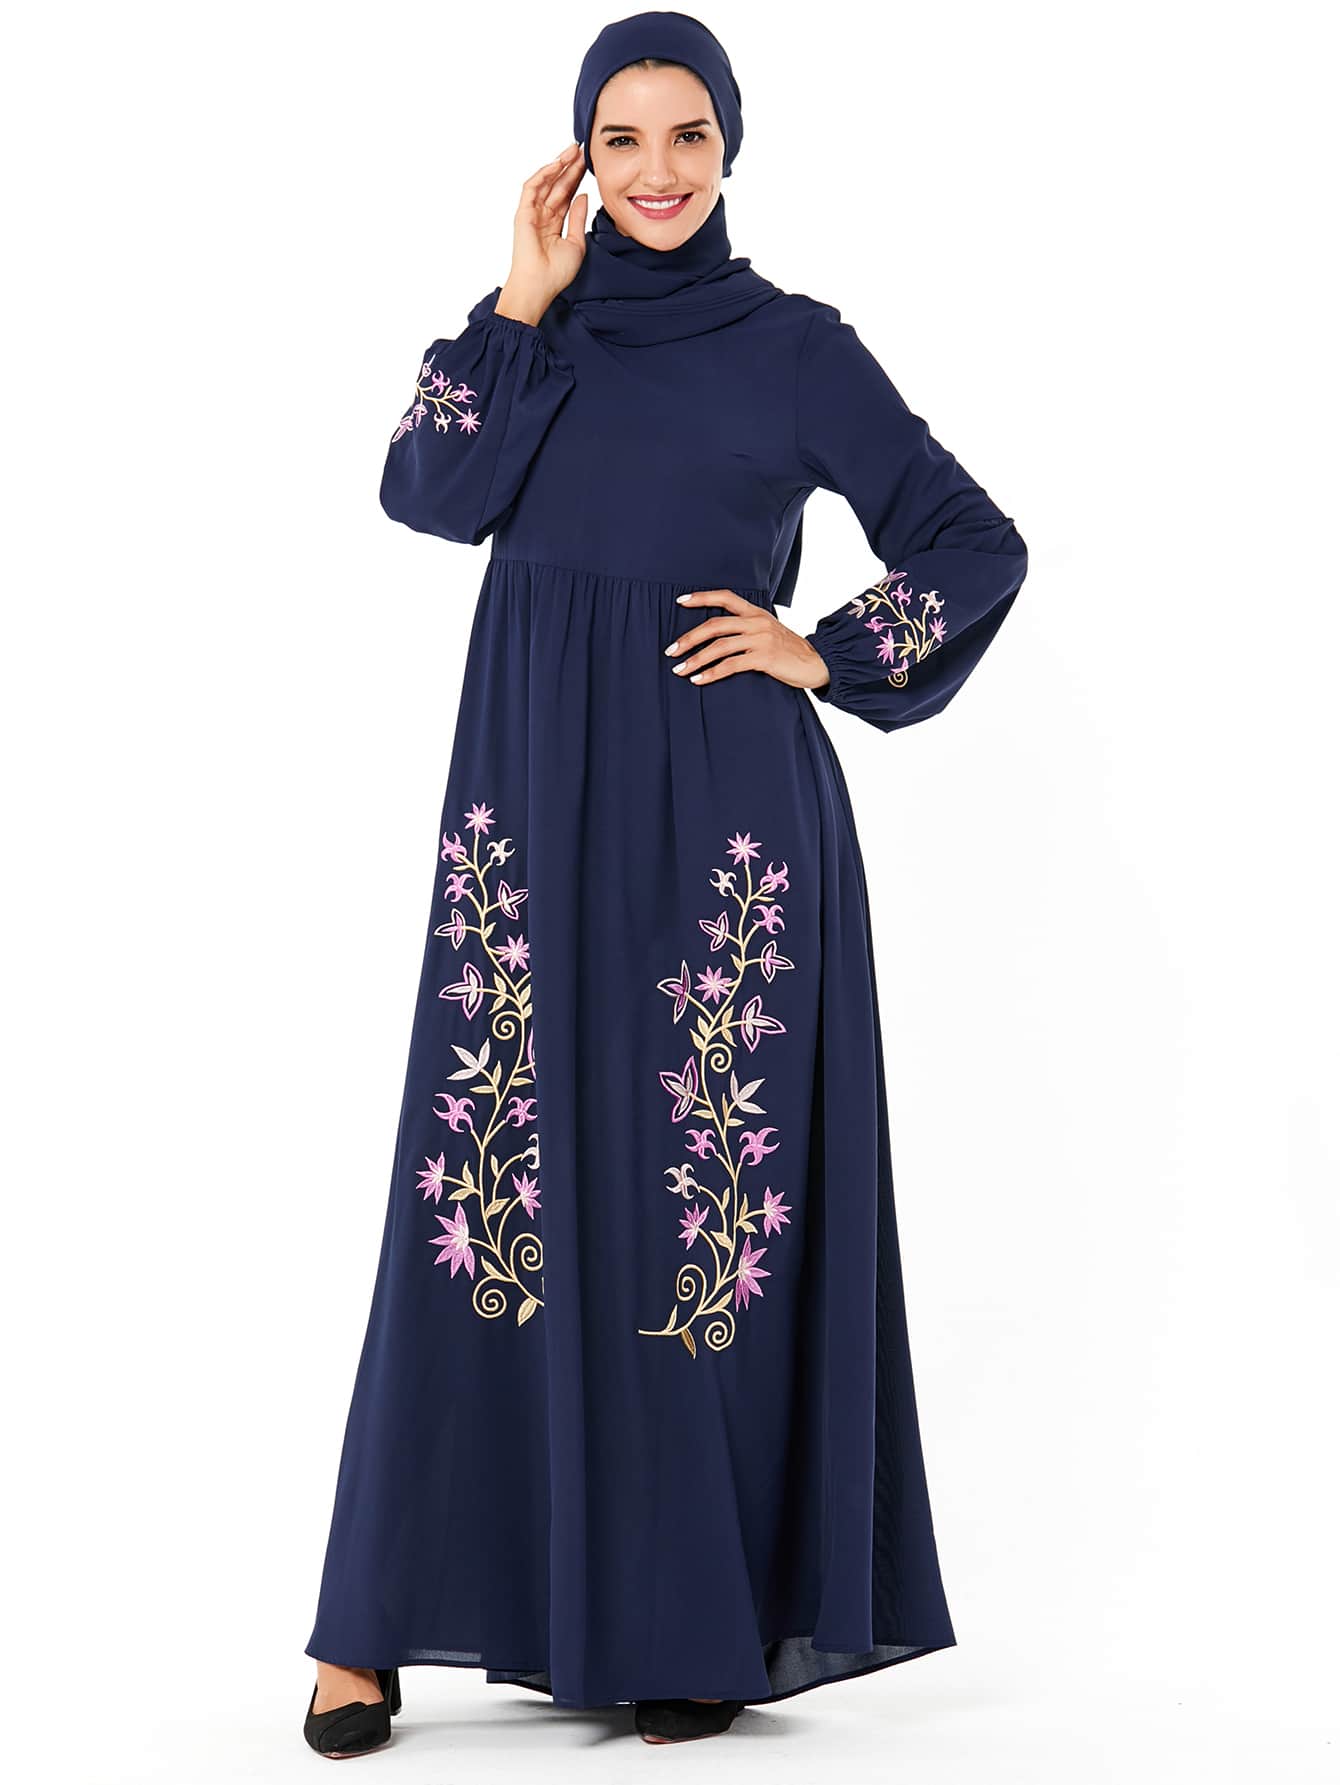 Floral Embroidery Bishop Sleeve Dress Without Headscarf